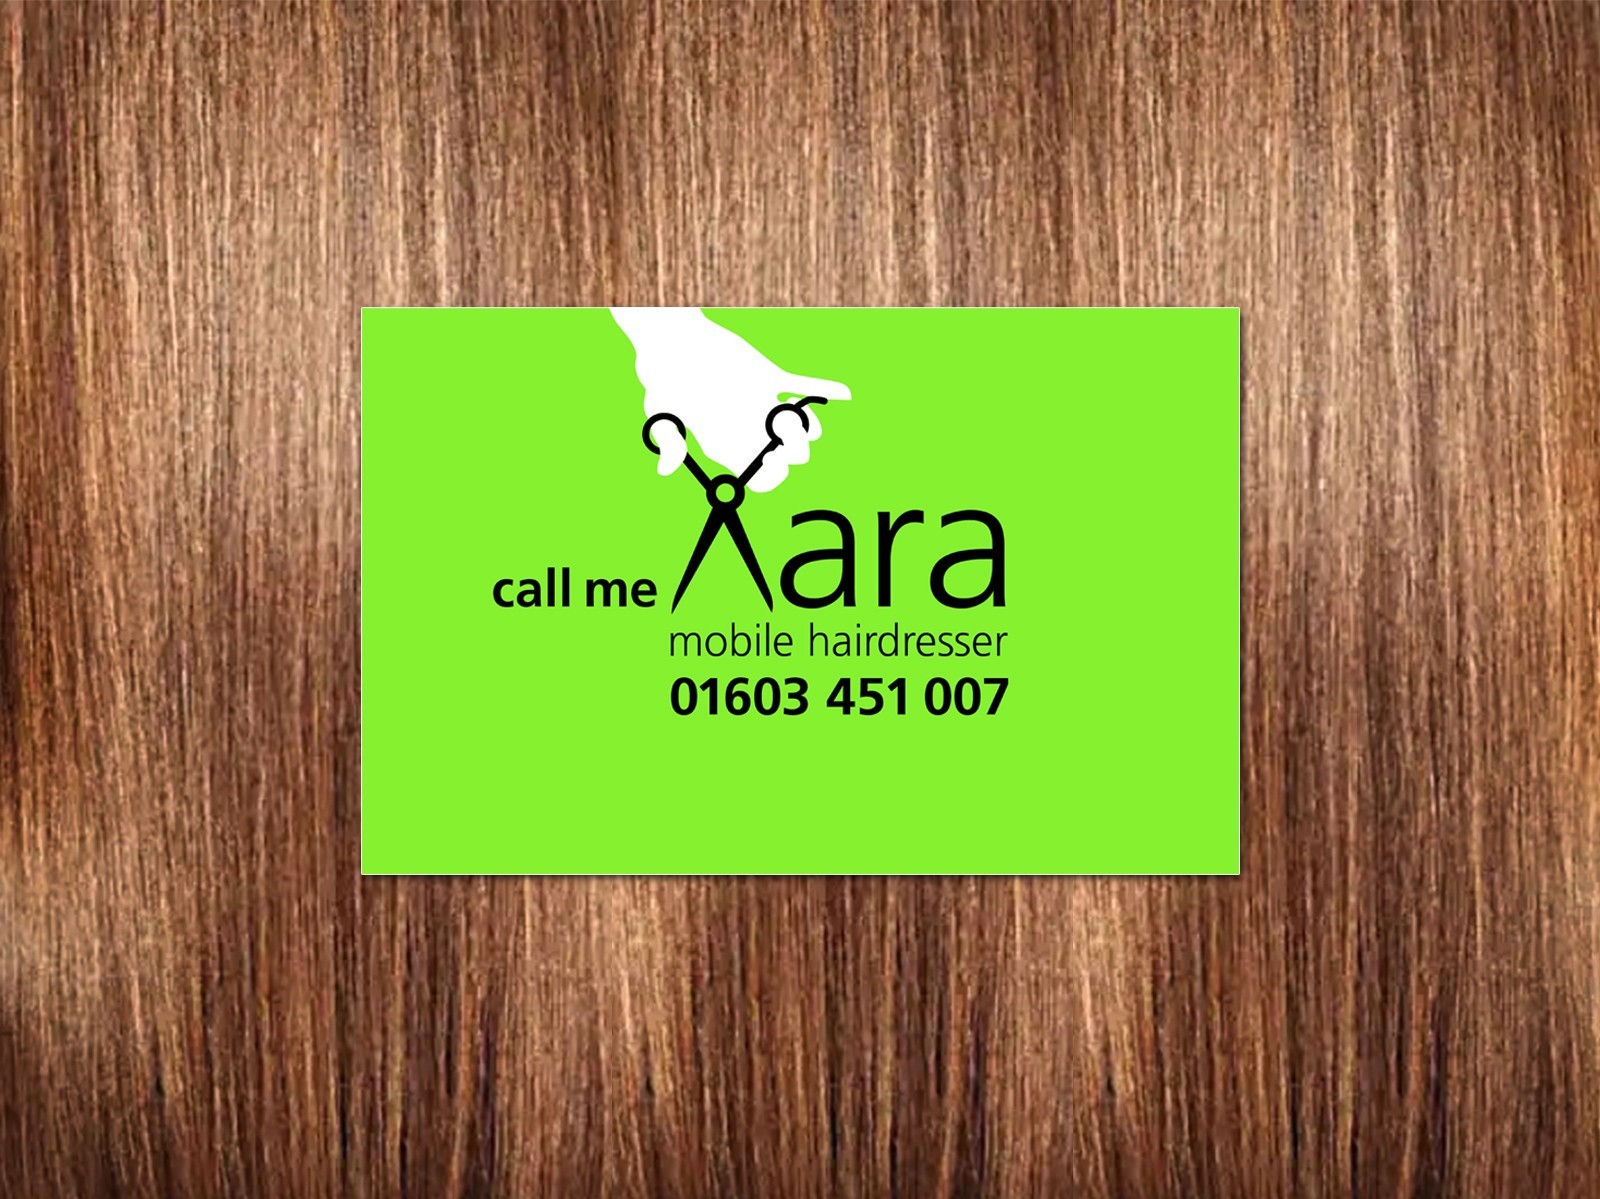 New Identity Design for a local hairdresser